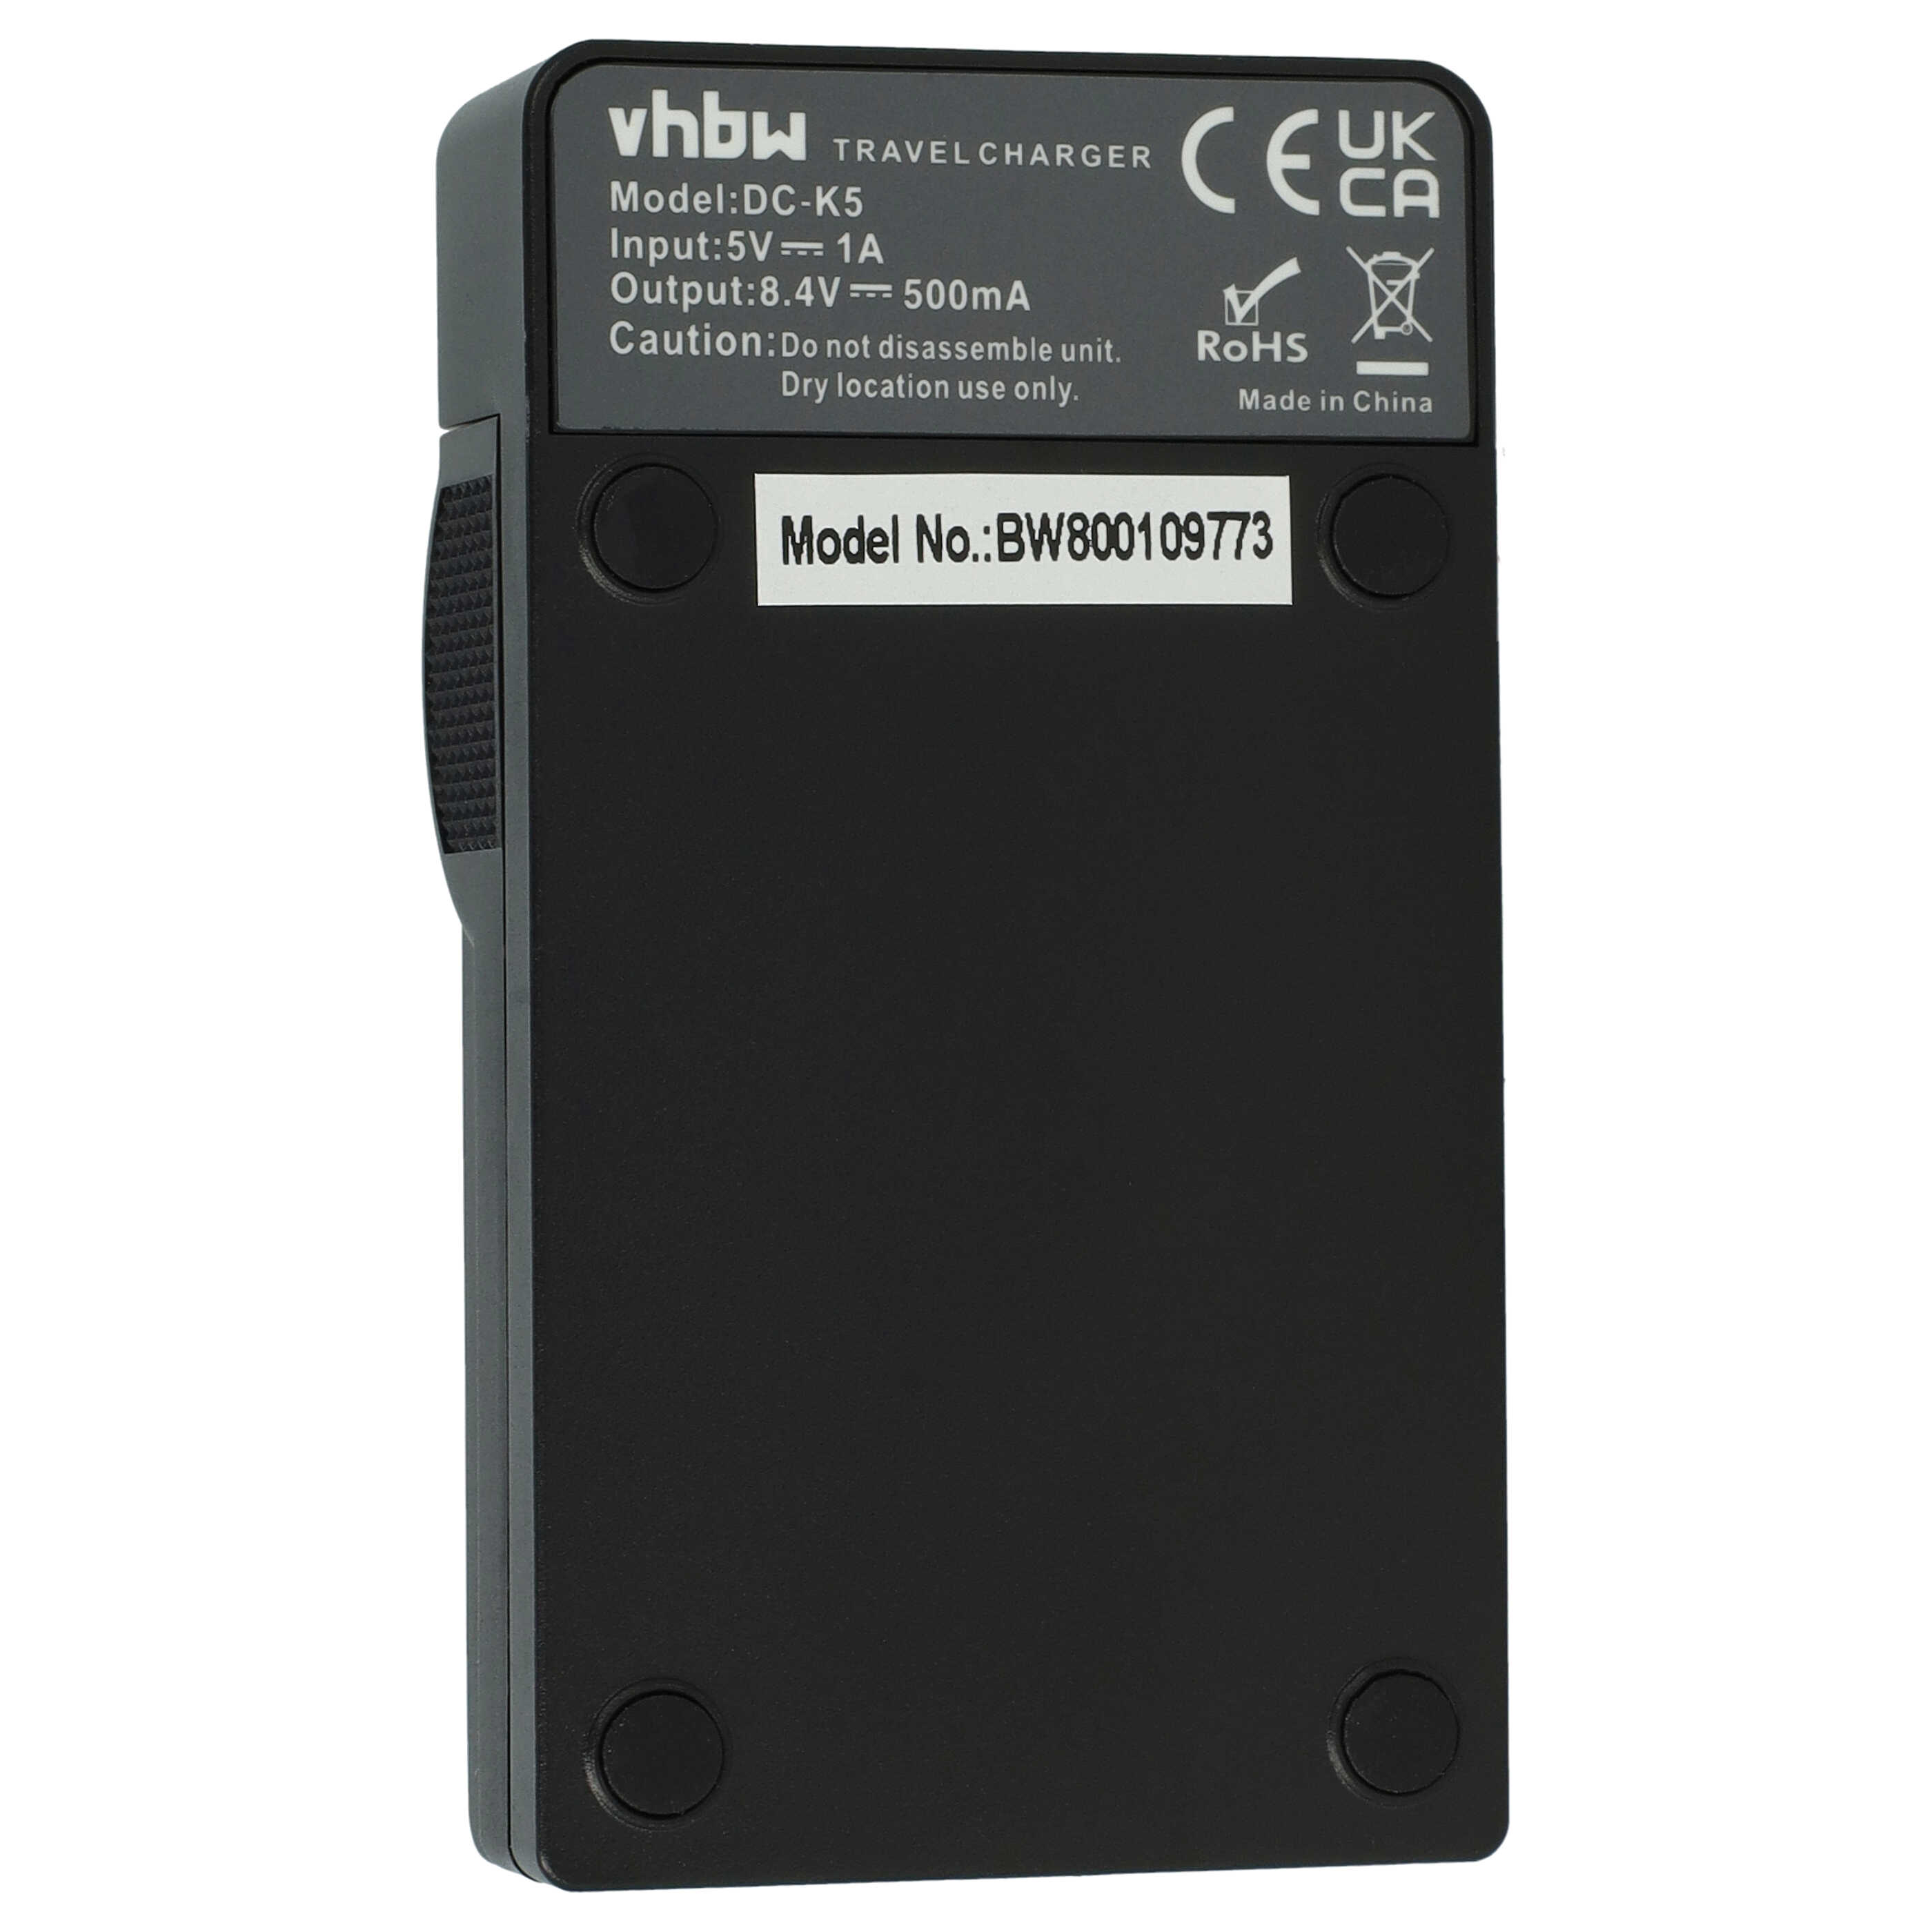 Battery Charger suitable for Minolta NP-800 Camera etc. - 0.5 A, 8.4 V